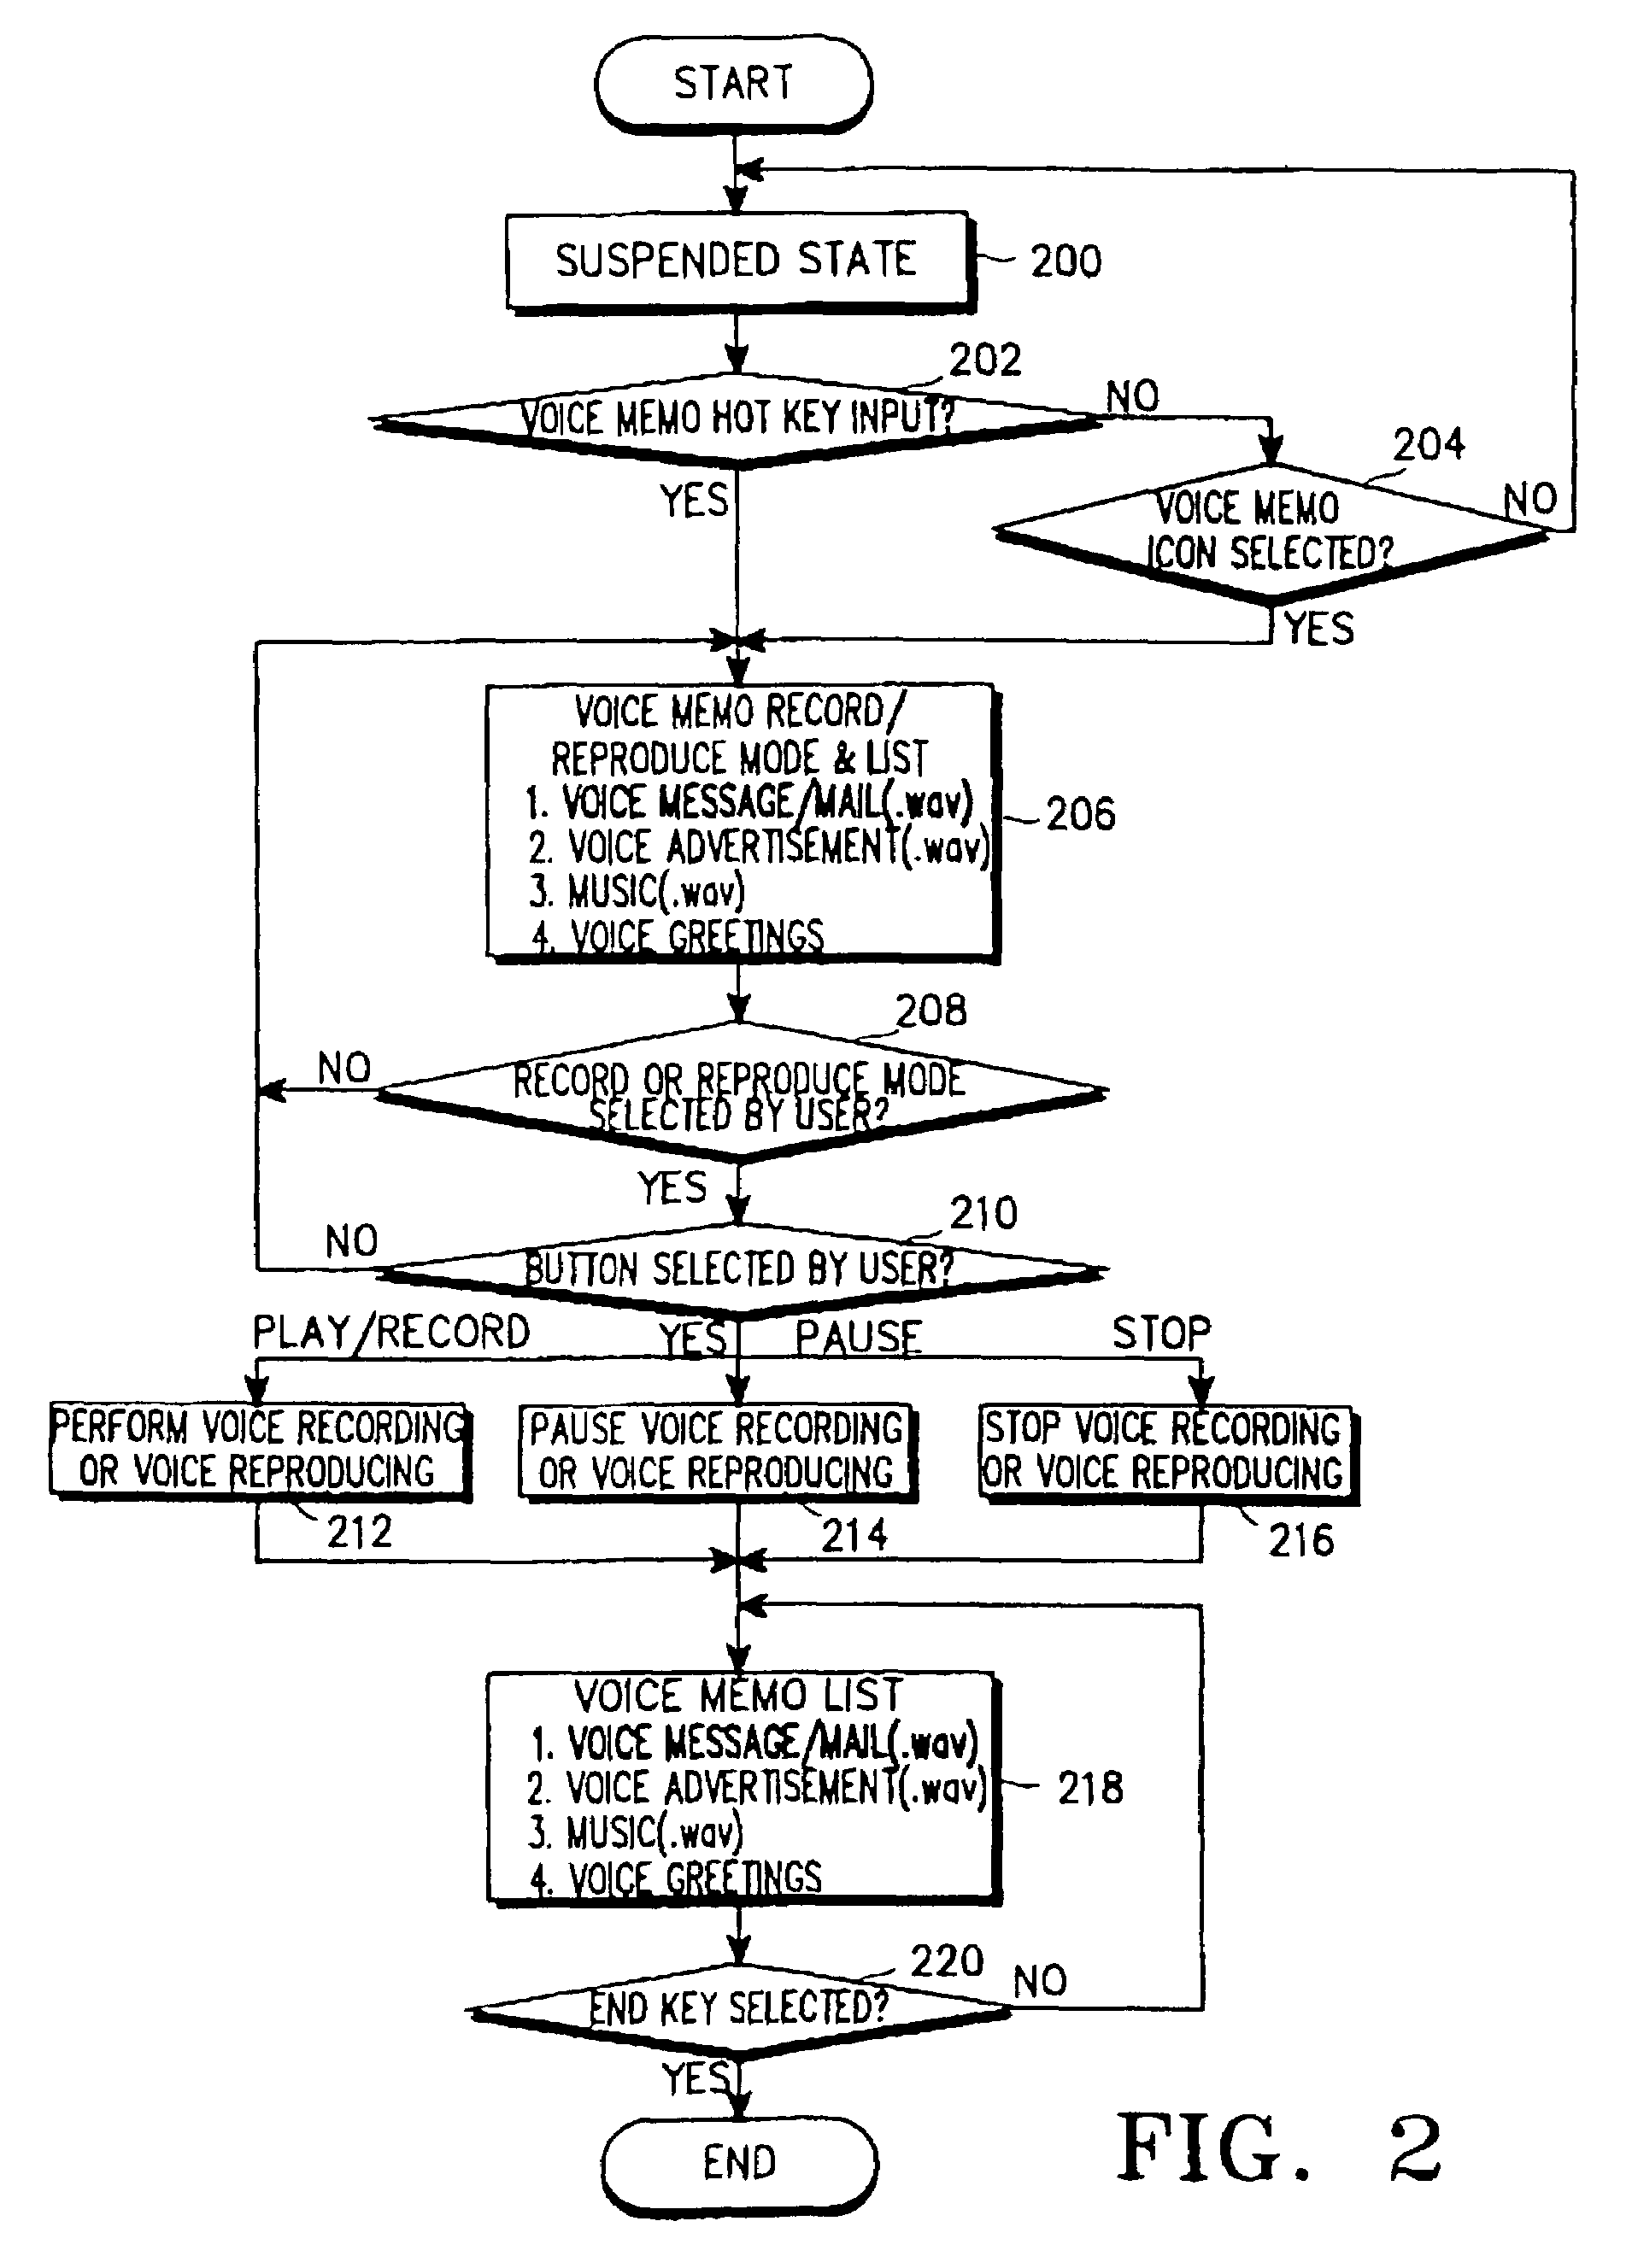 Method for storing and transmitting voice mail using SVMS in a mobile communication terminal